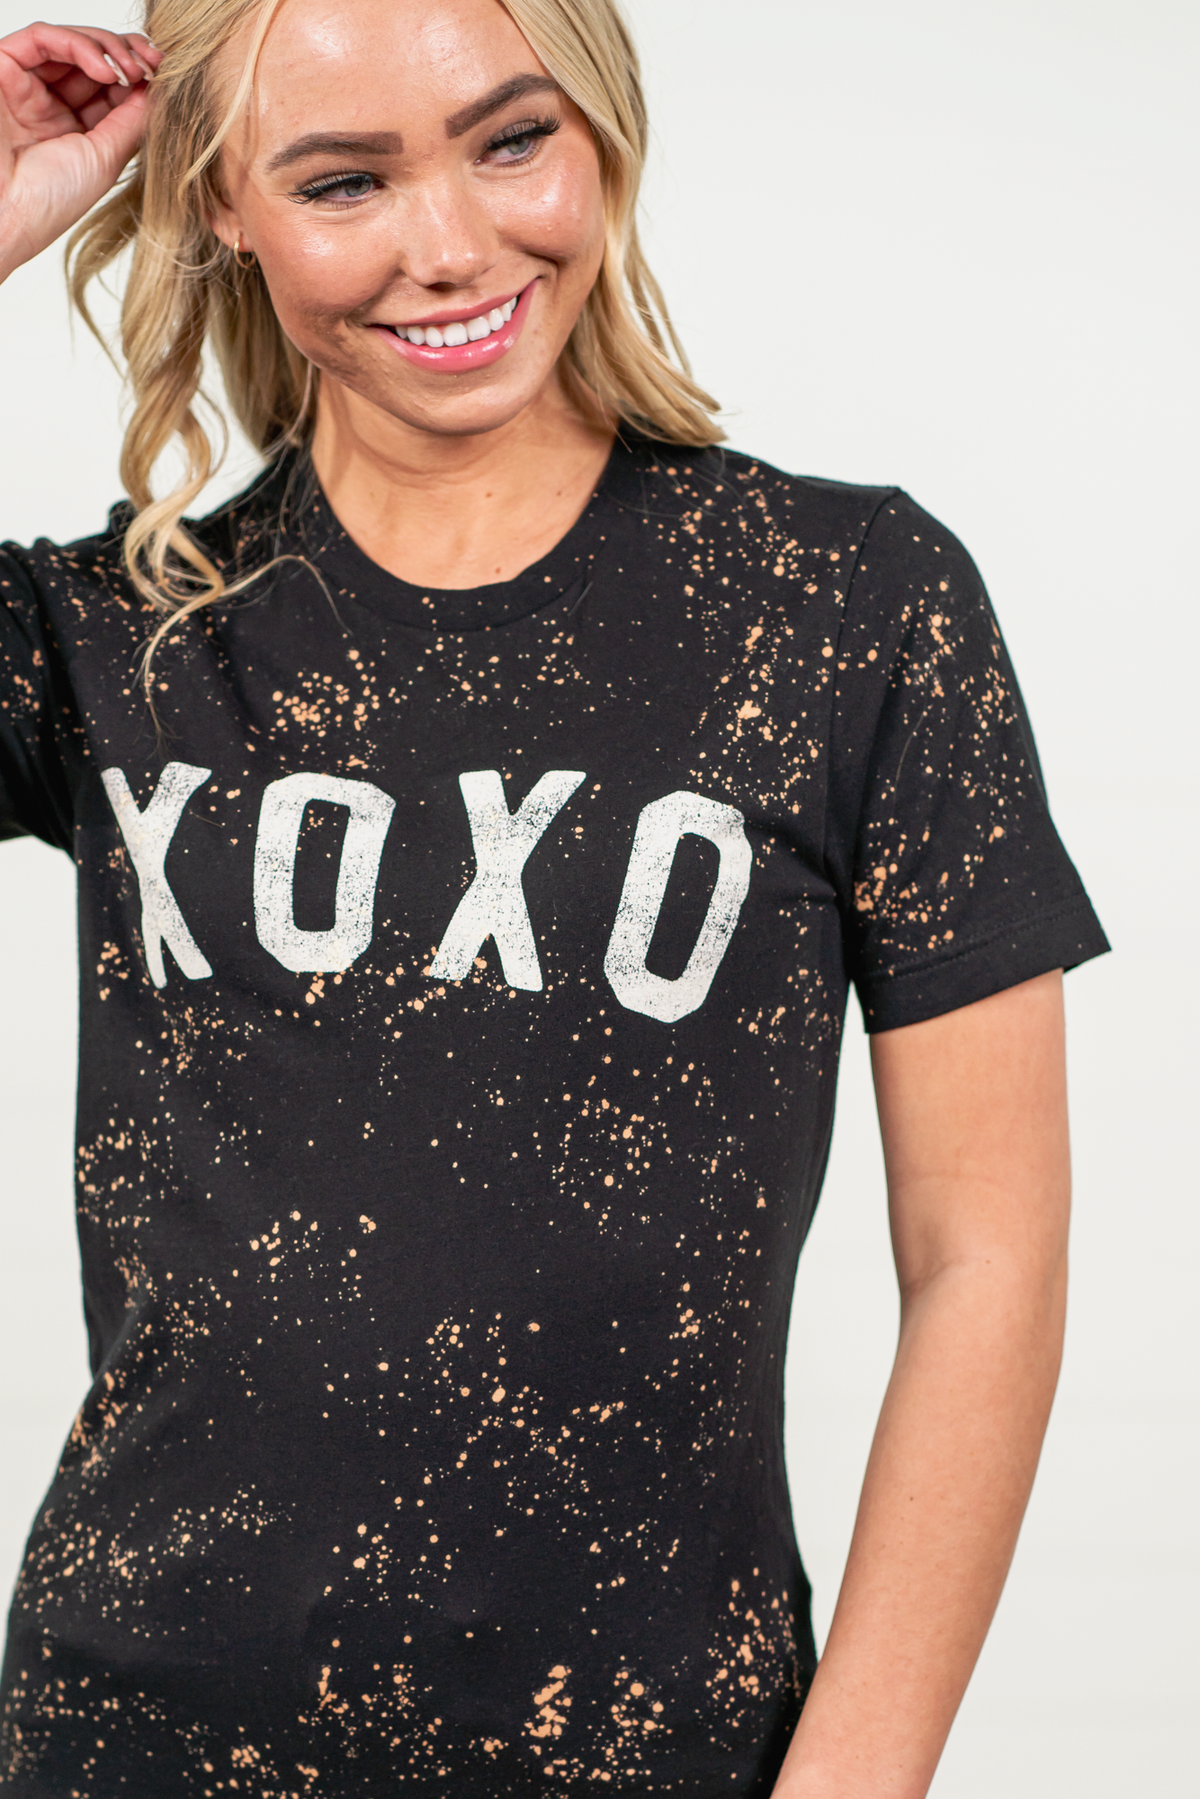 XOXO by Oat Collective   Graphic Fleece Pullover Relaxed Fit Crop   Color: Black Neckline: Round  Sleeve: Short Sleeve Relaxed Fit T Style #: OT2112X115  Contact us for any additional measurements or sizing.    